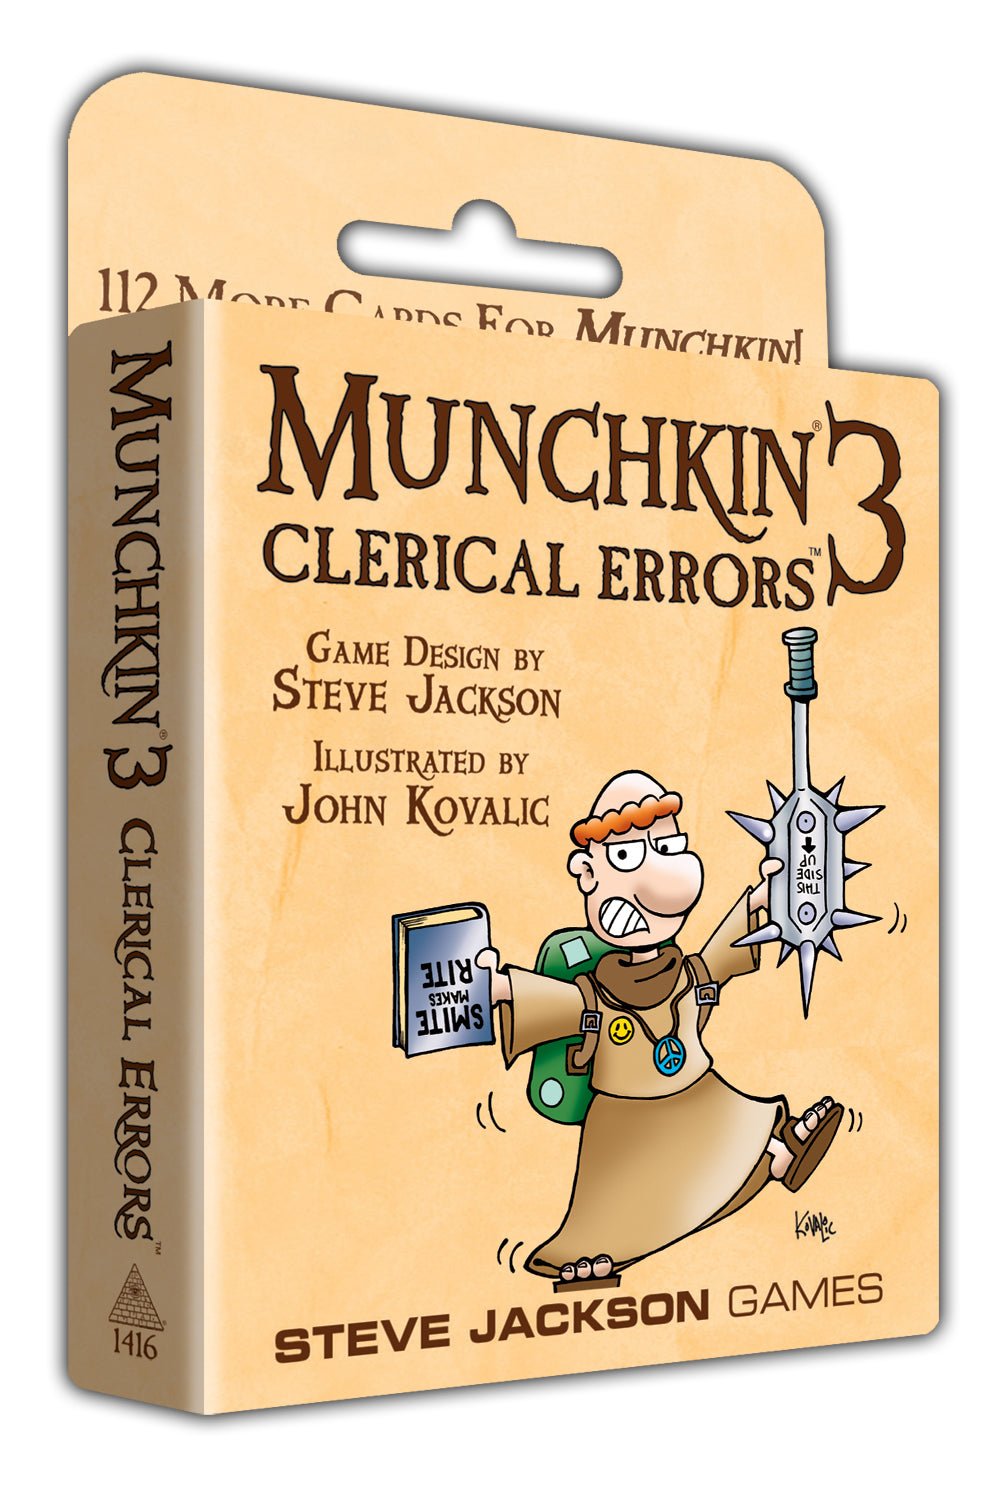 Munchkin: Munchkin 3 - Clerical Errors (Revised) - The Fourth Place